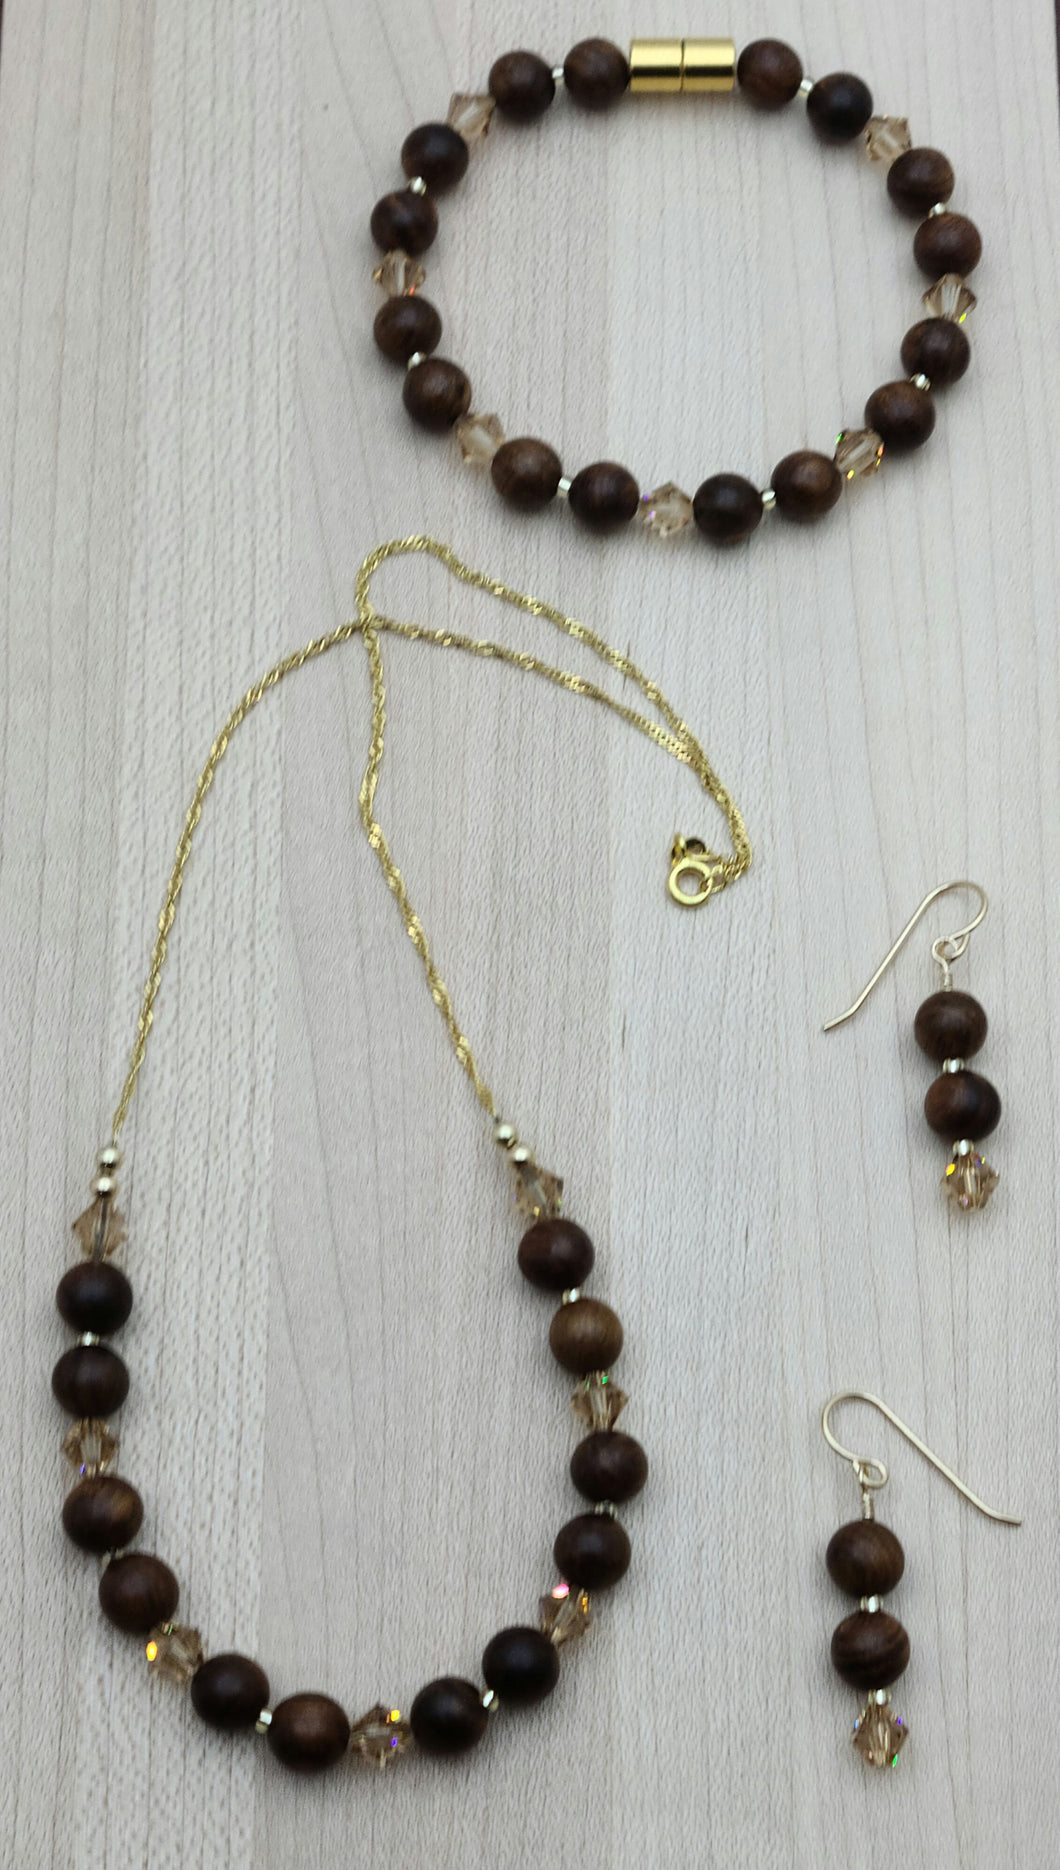 Rosewood is said to represent romantic love & sincere blessings. Paired with light light topaz crystals & gold, it is warm & inviting. necklace, bracelet, earrings